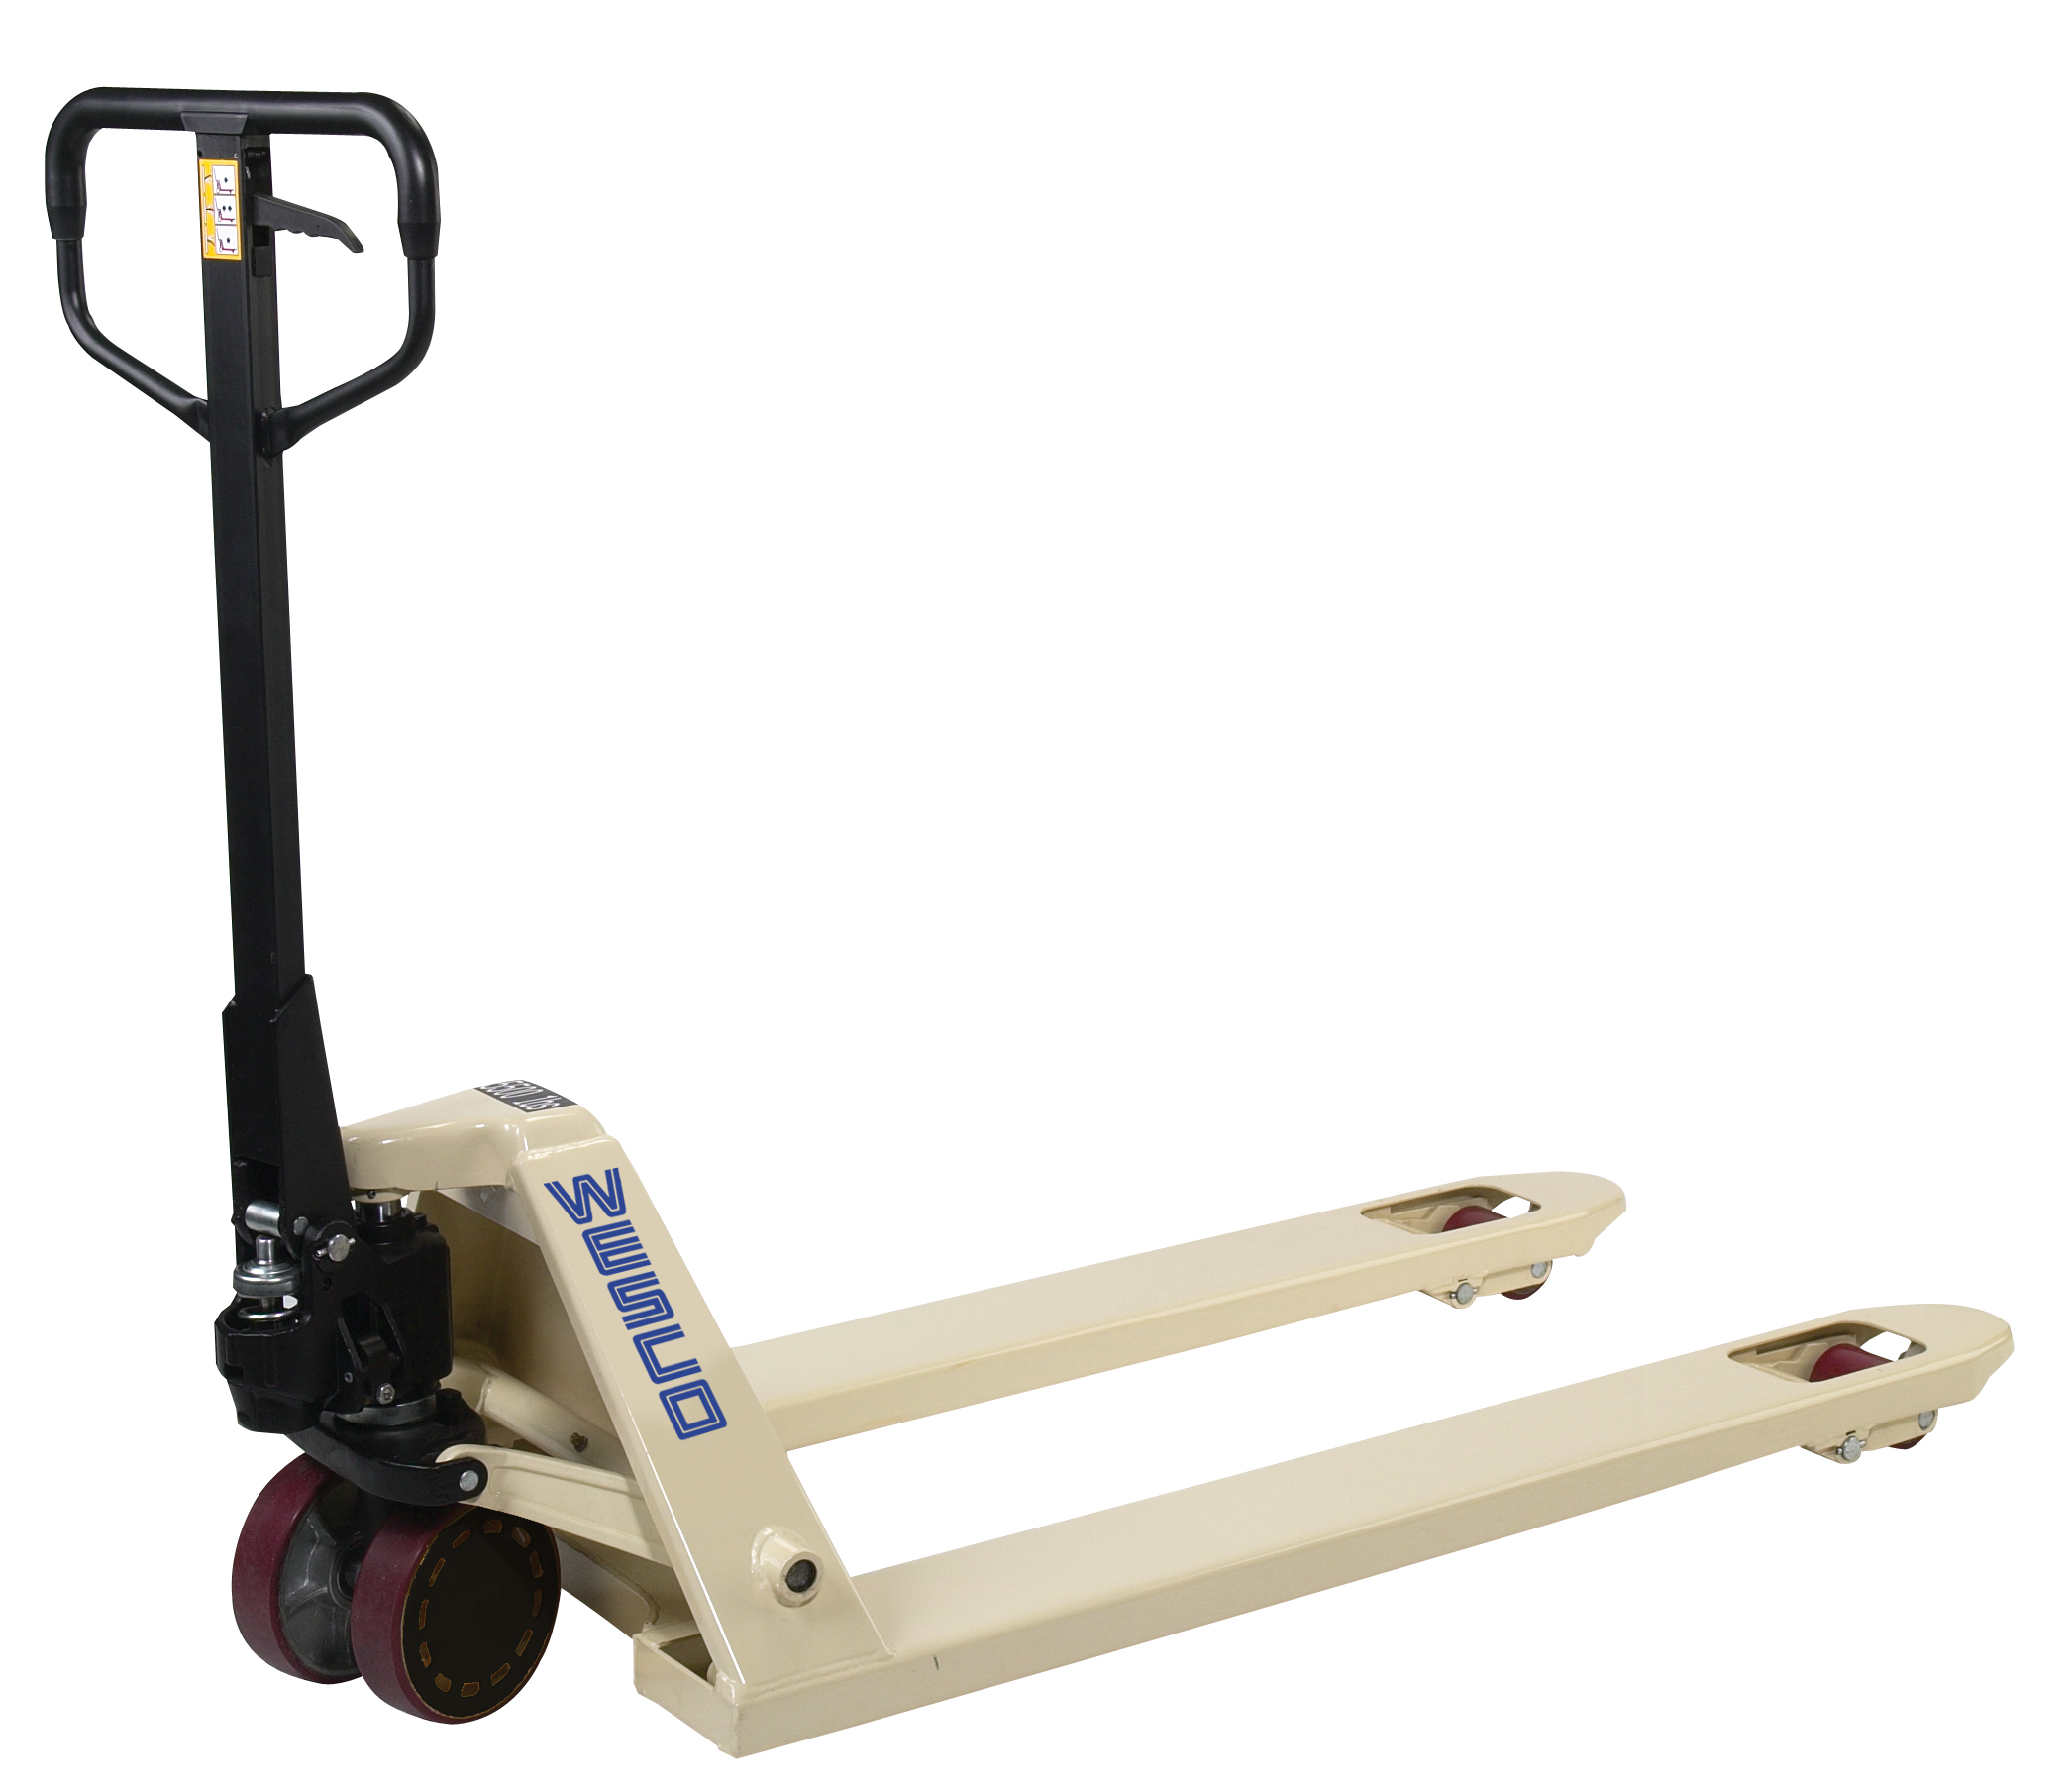 Pallet Truck, 5500 Lbs Capacity, 57 Inch x 27 Inch Size